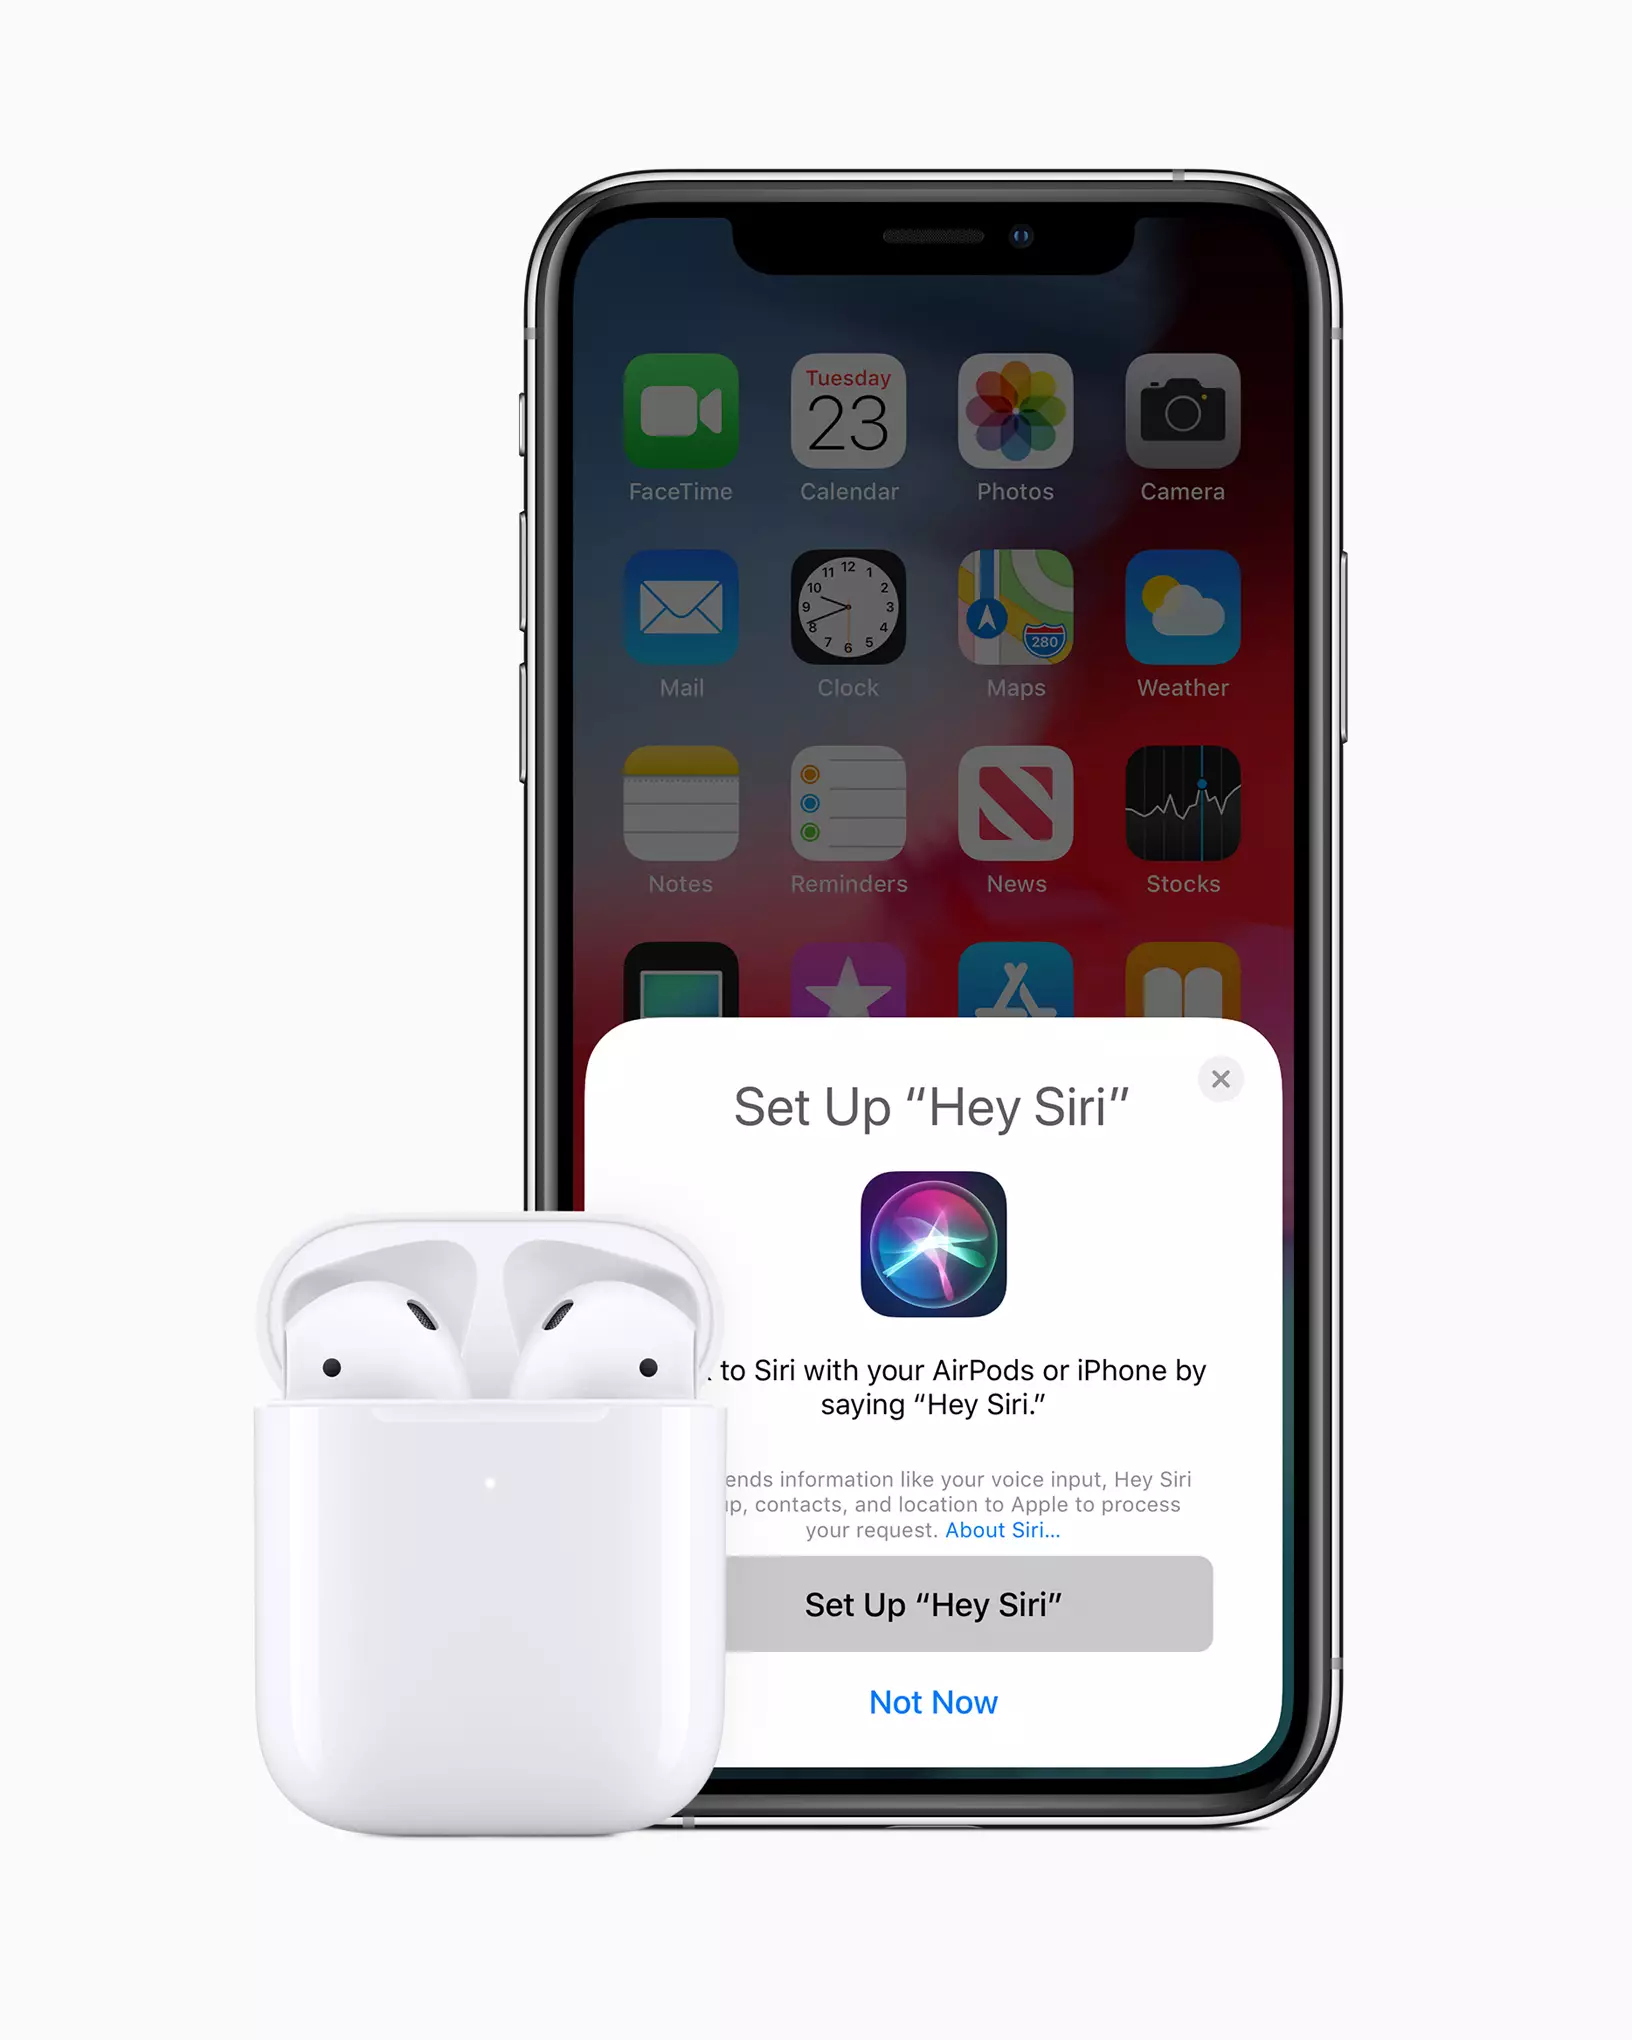 The new AirPods allow for 50 per cent more talk time.